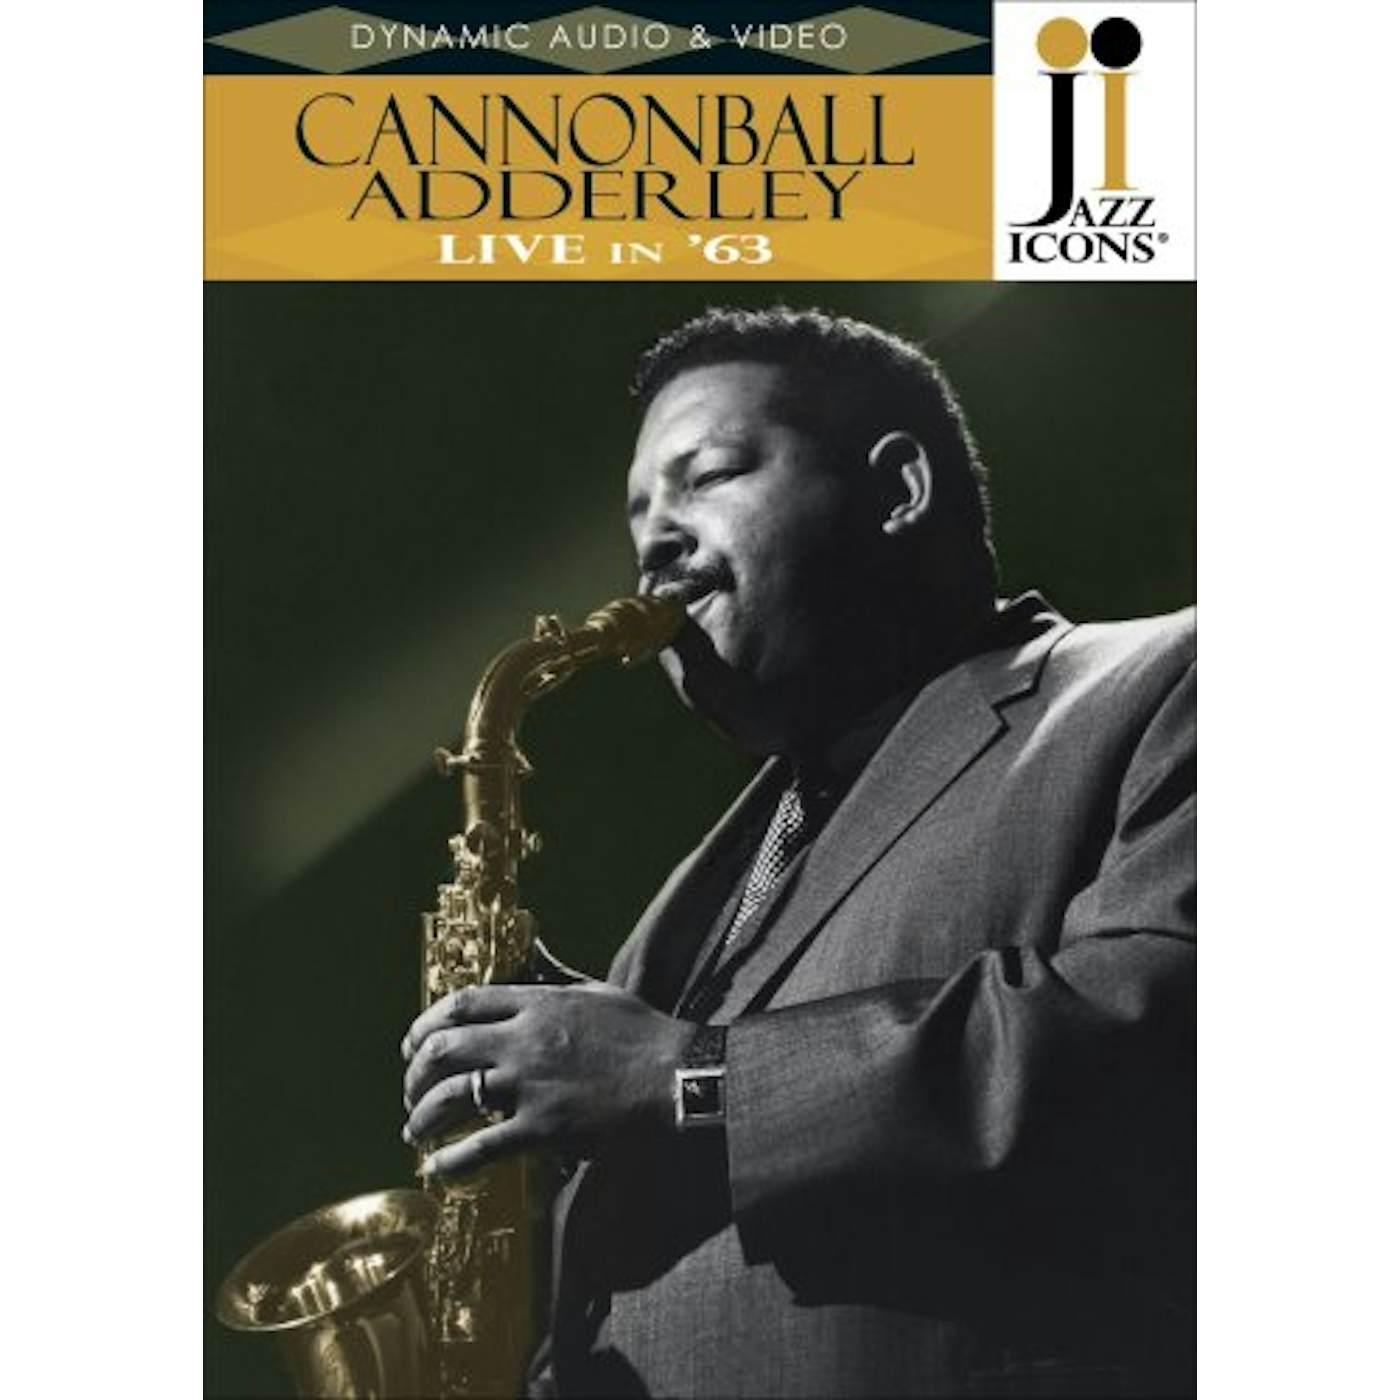 JAZZ ICONS: CANNONBALL ADDERLEY LIVE IN 63 DVD